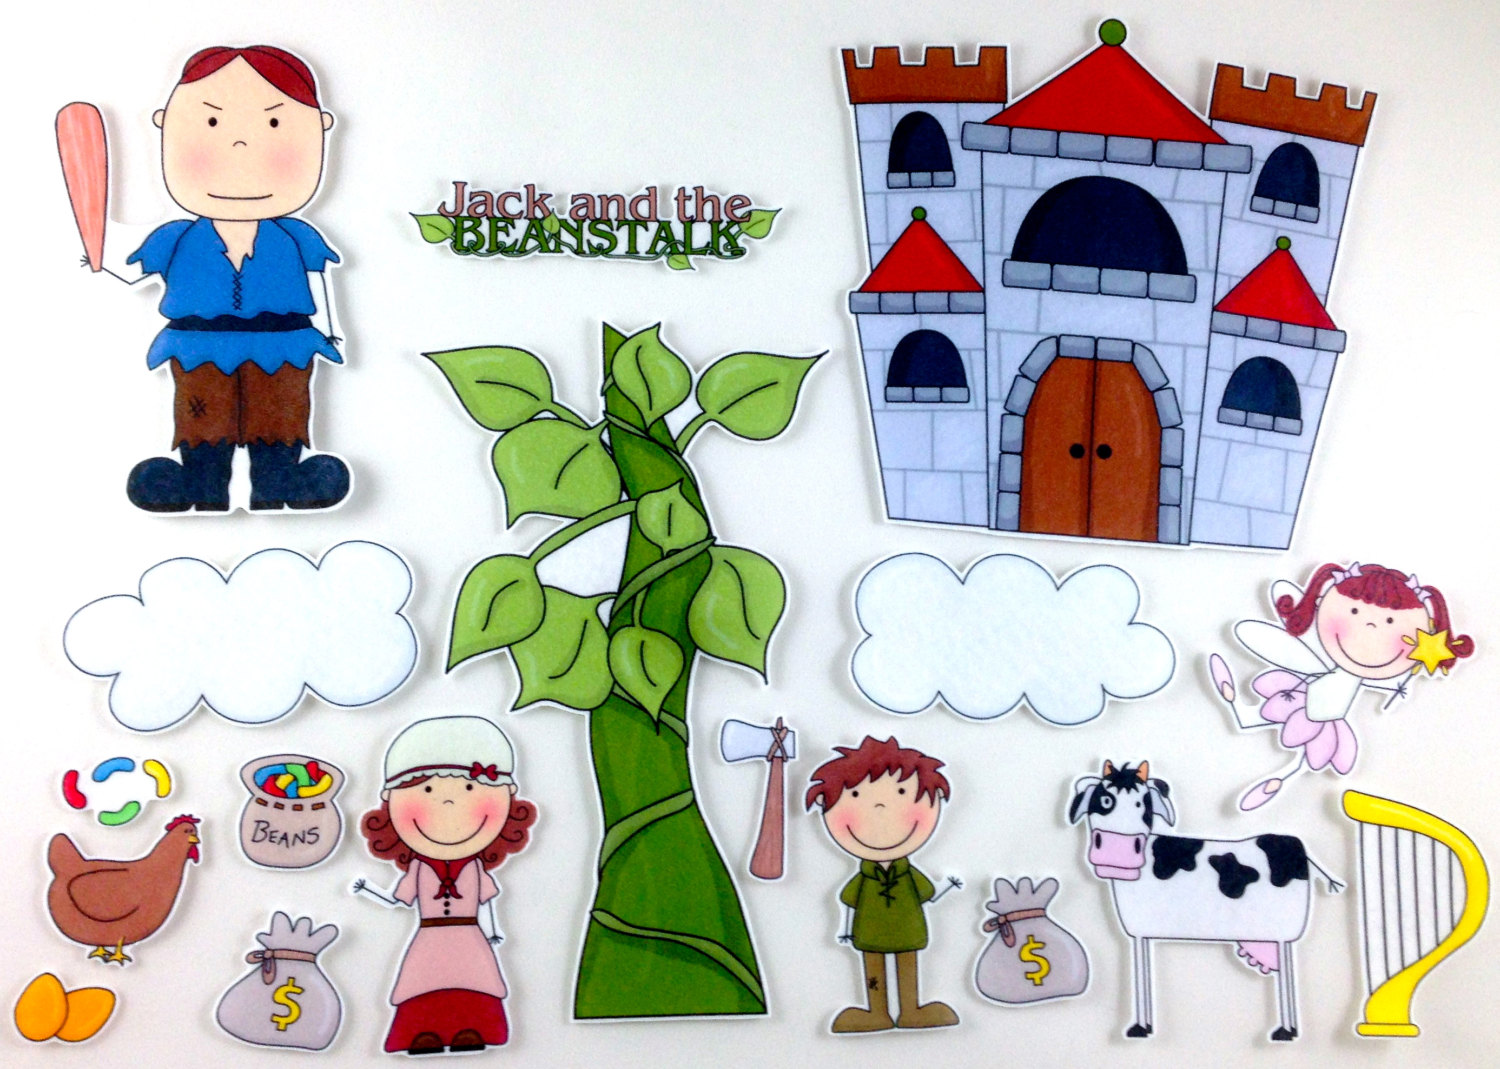 jack-and-the-beanstalk-characters-cliparts-co